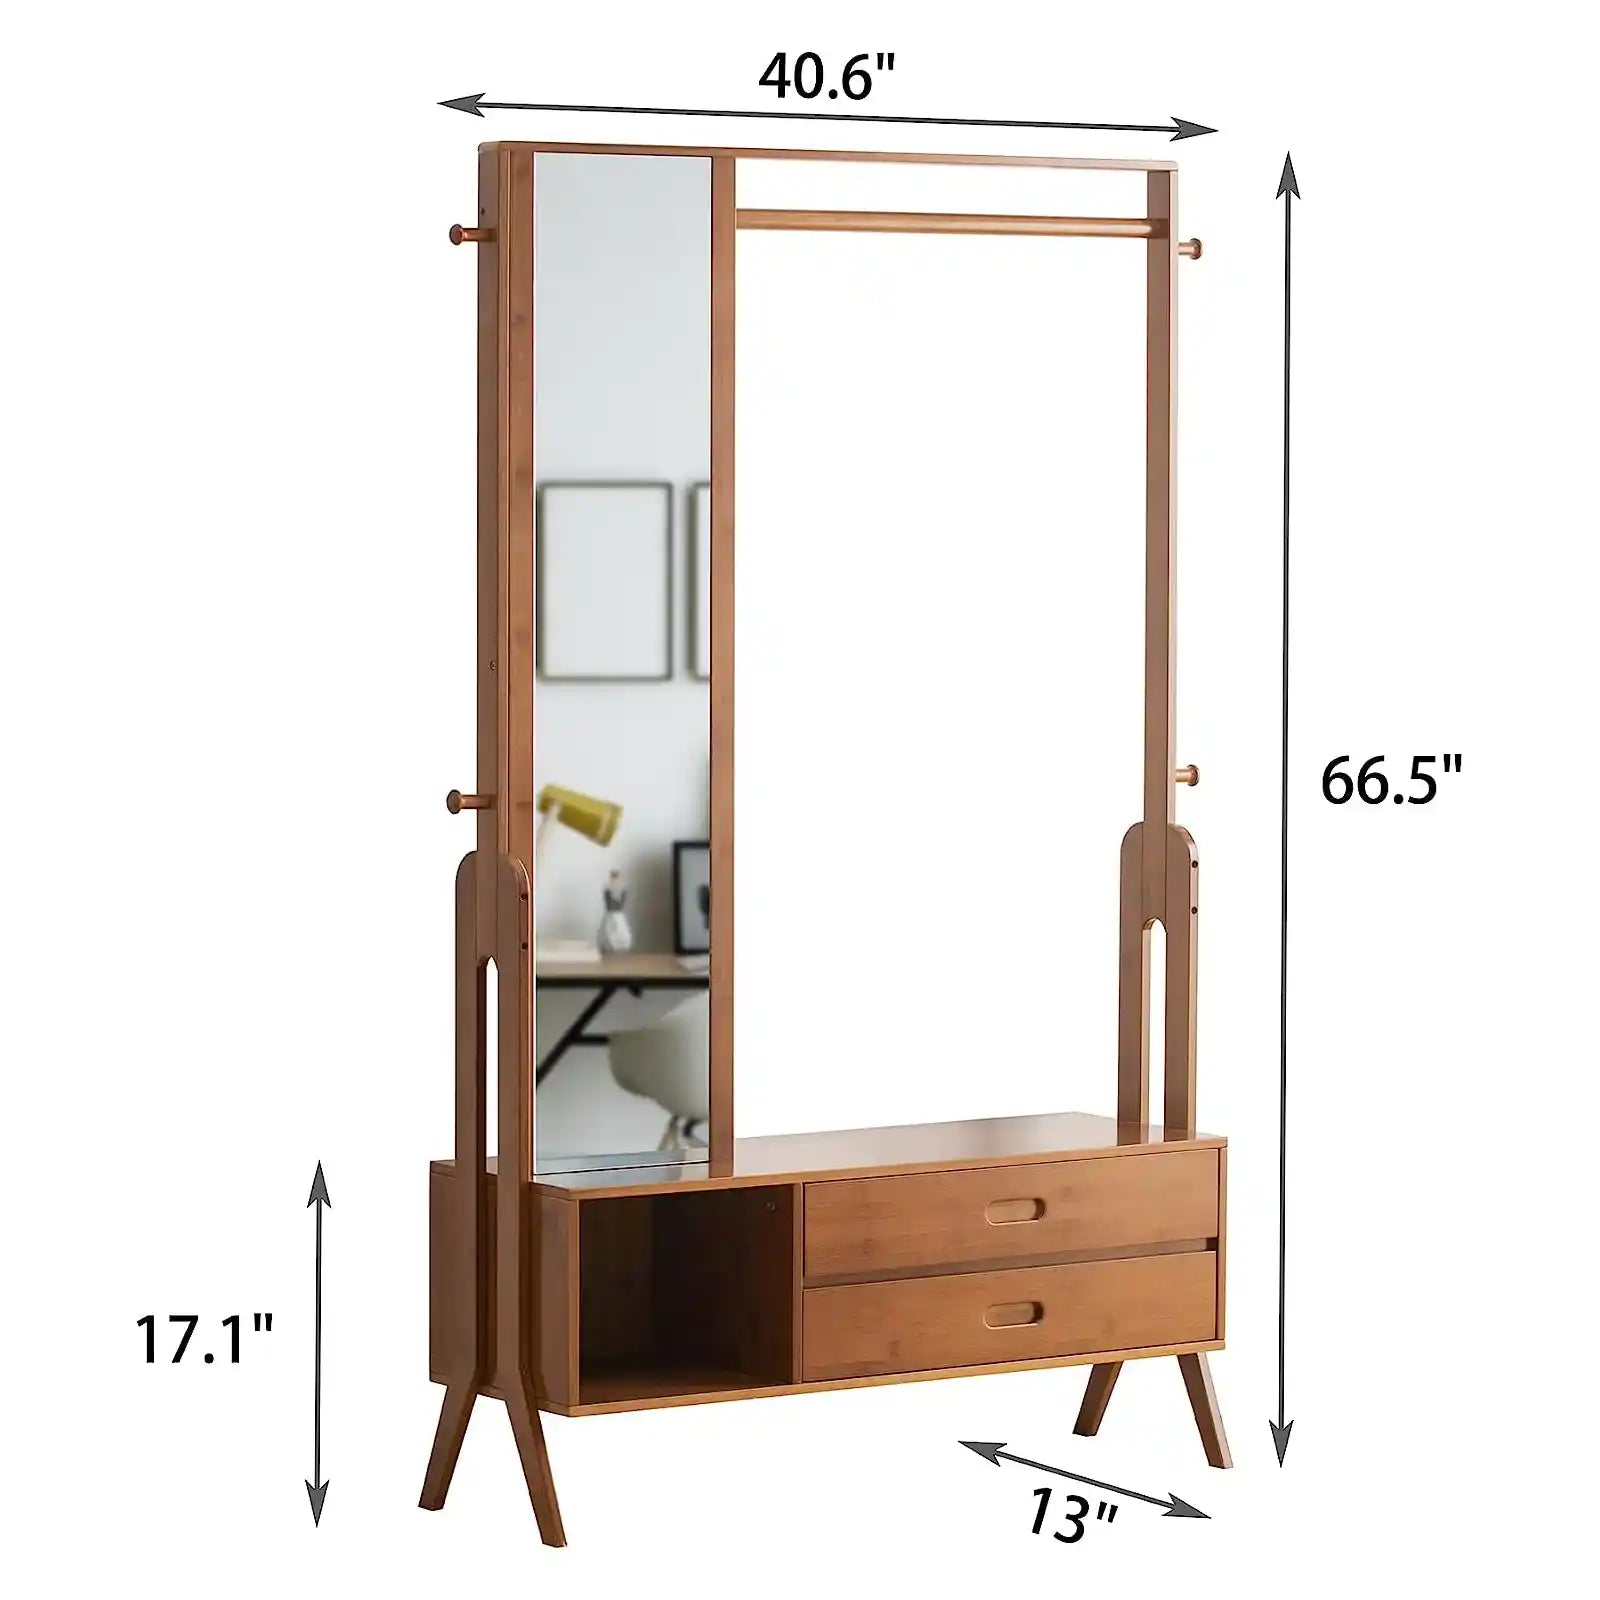 Bamboo Wooden Garment Rack Freestanding Closet Organizers and Storage Drawers with Mirror&Hooks, Coat Rack, Open Wardrobe for Entryway